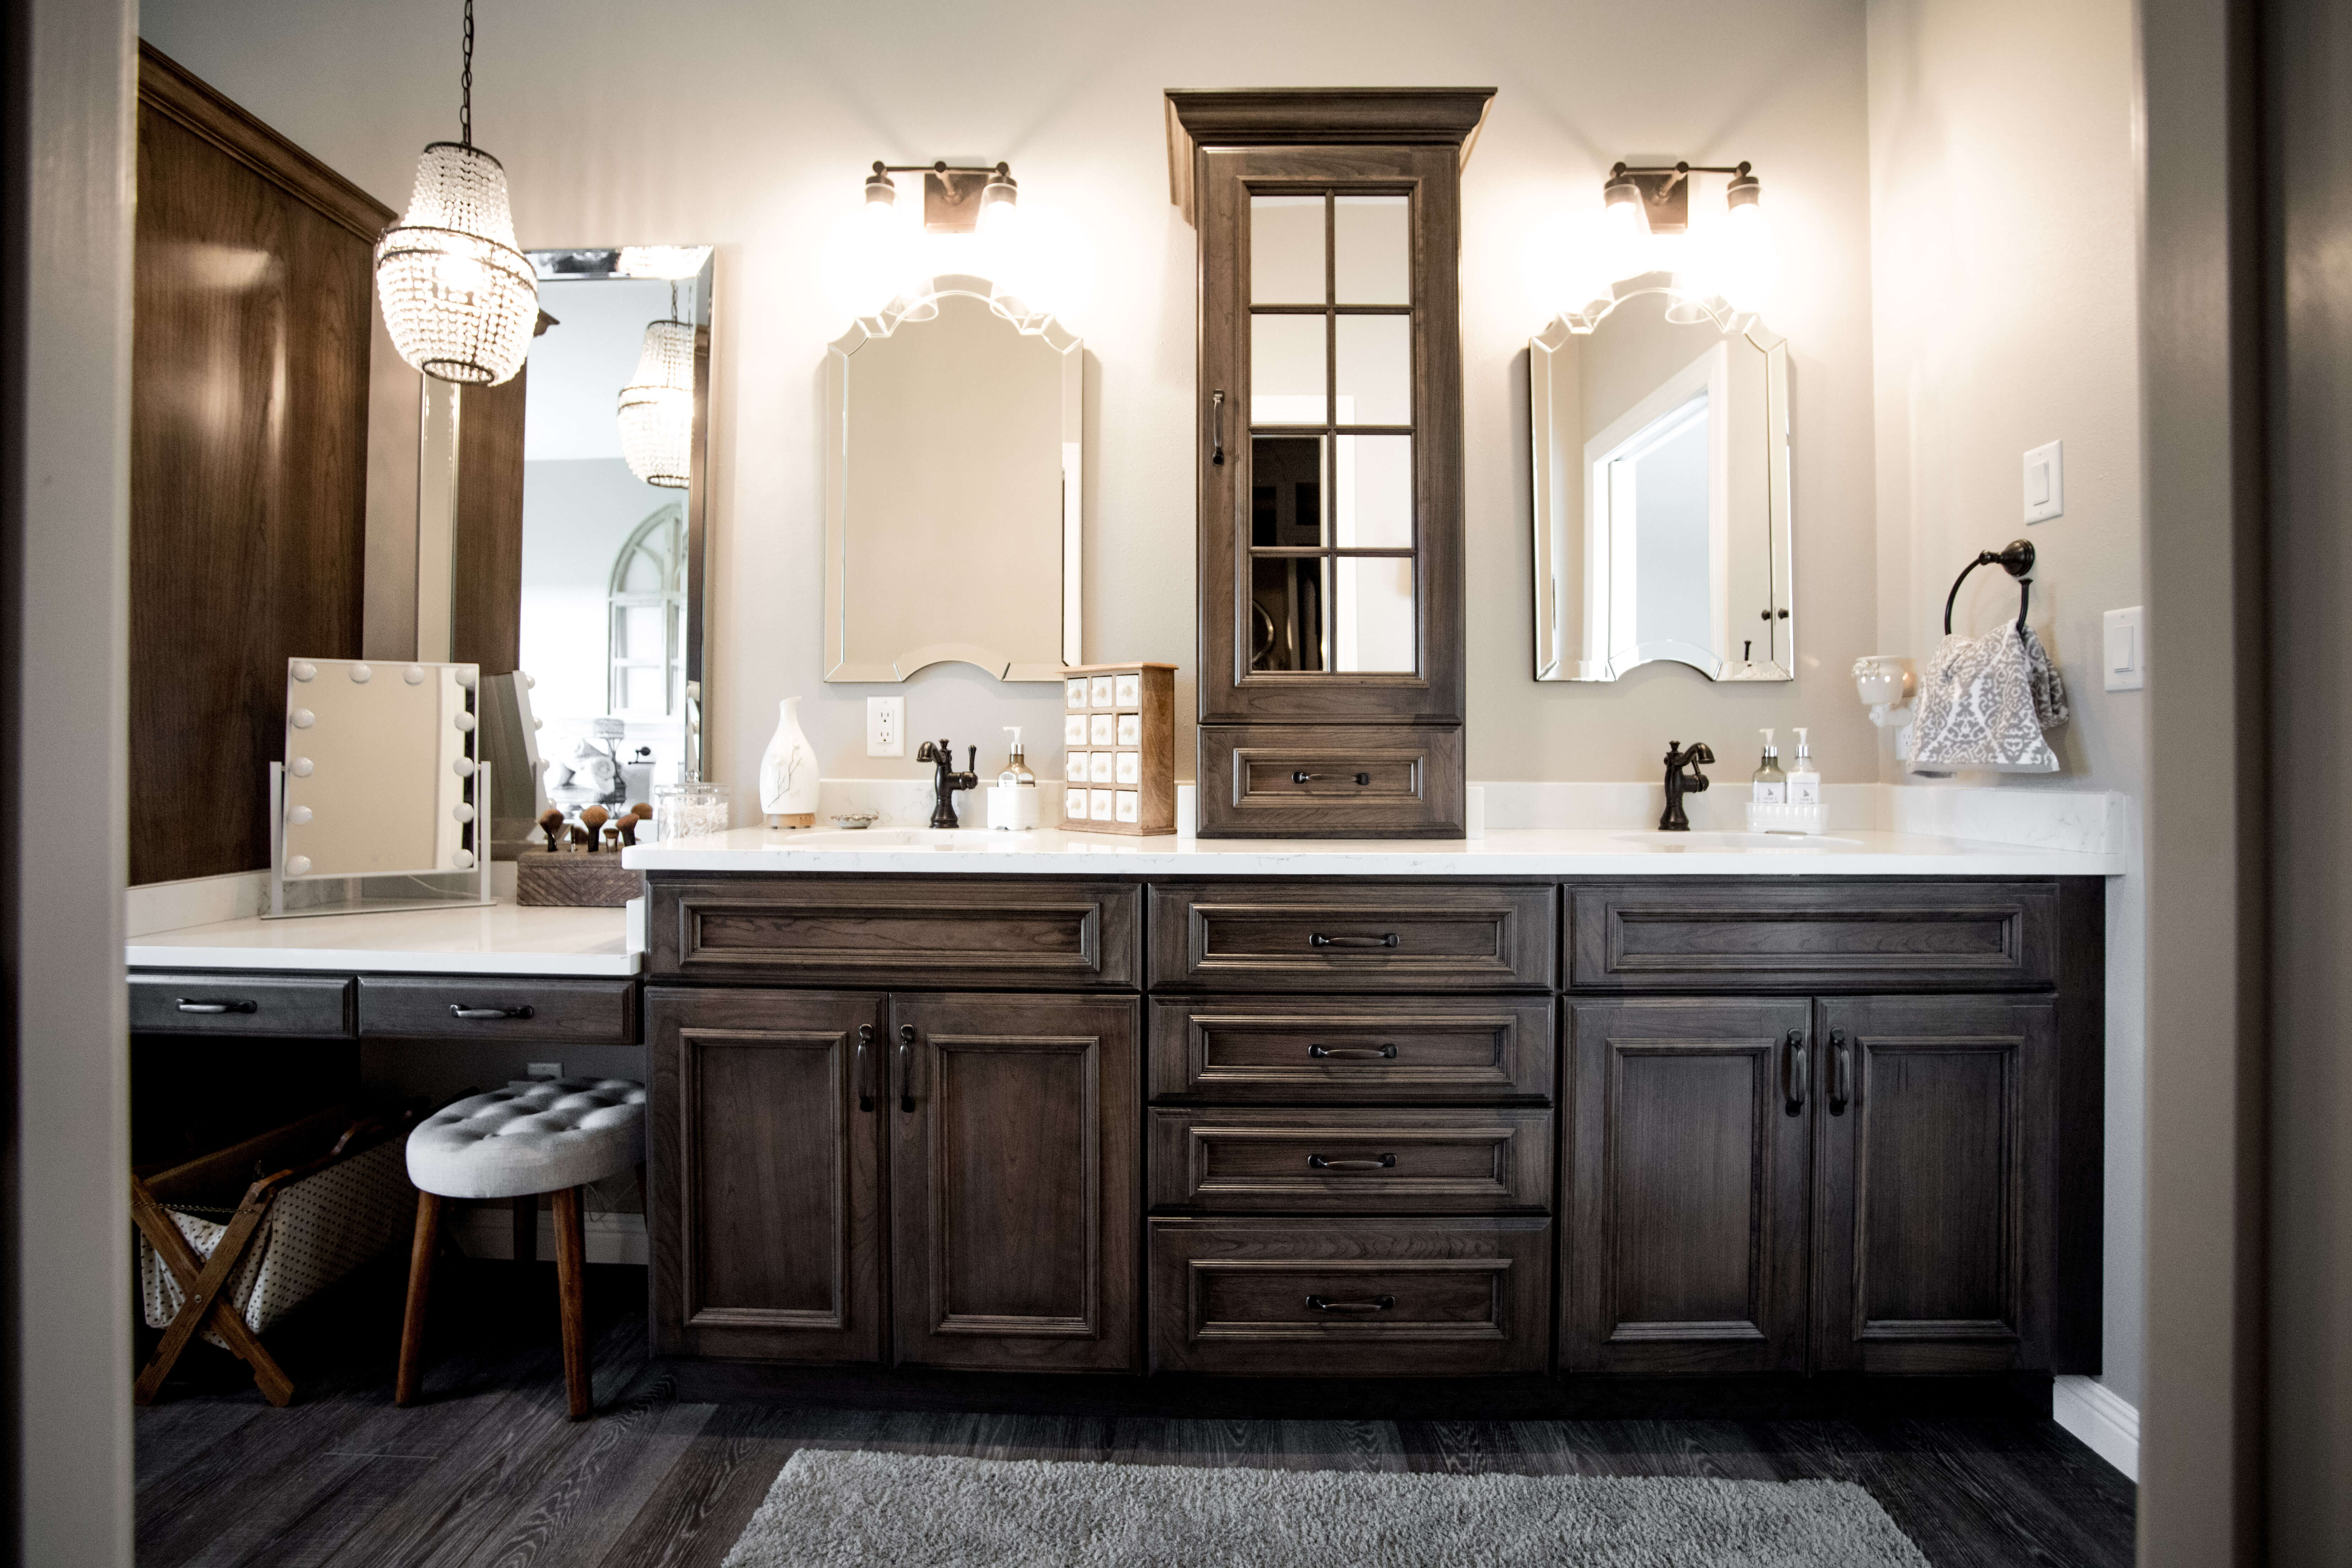 A dark rustic bathroom vanity with double sinks and tower in the middle.